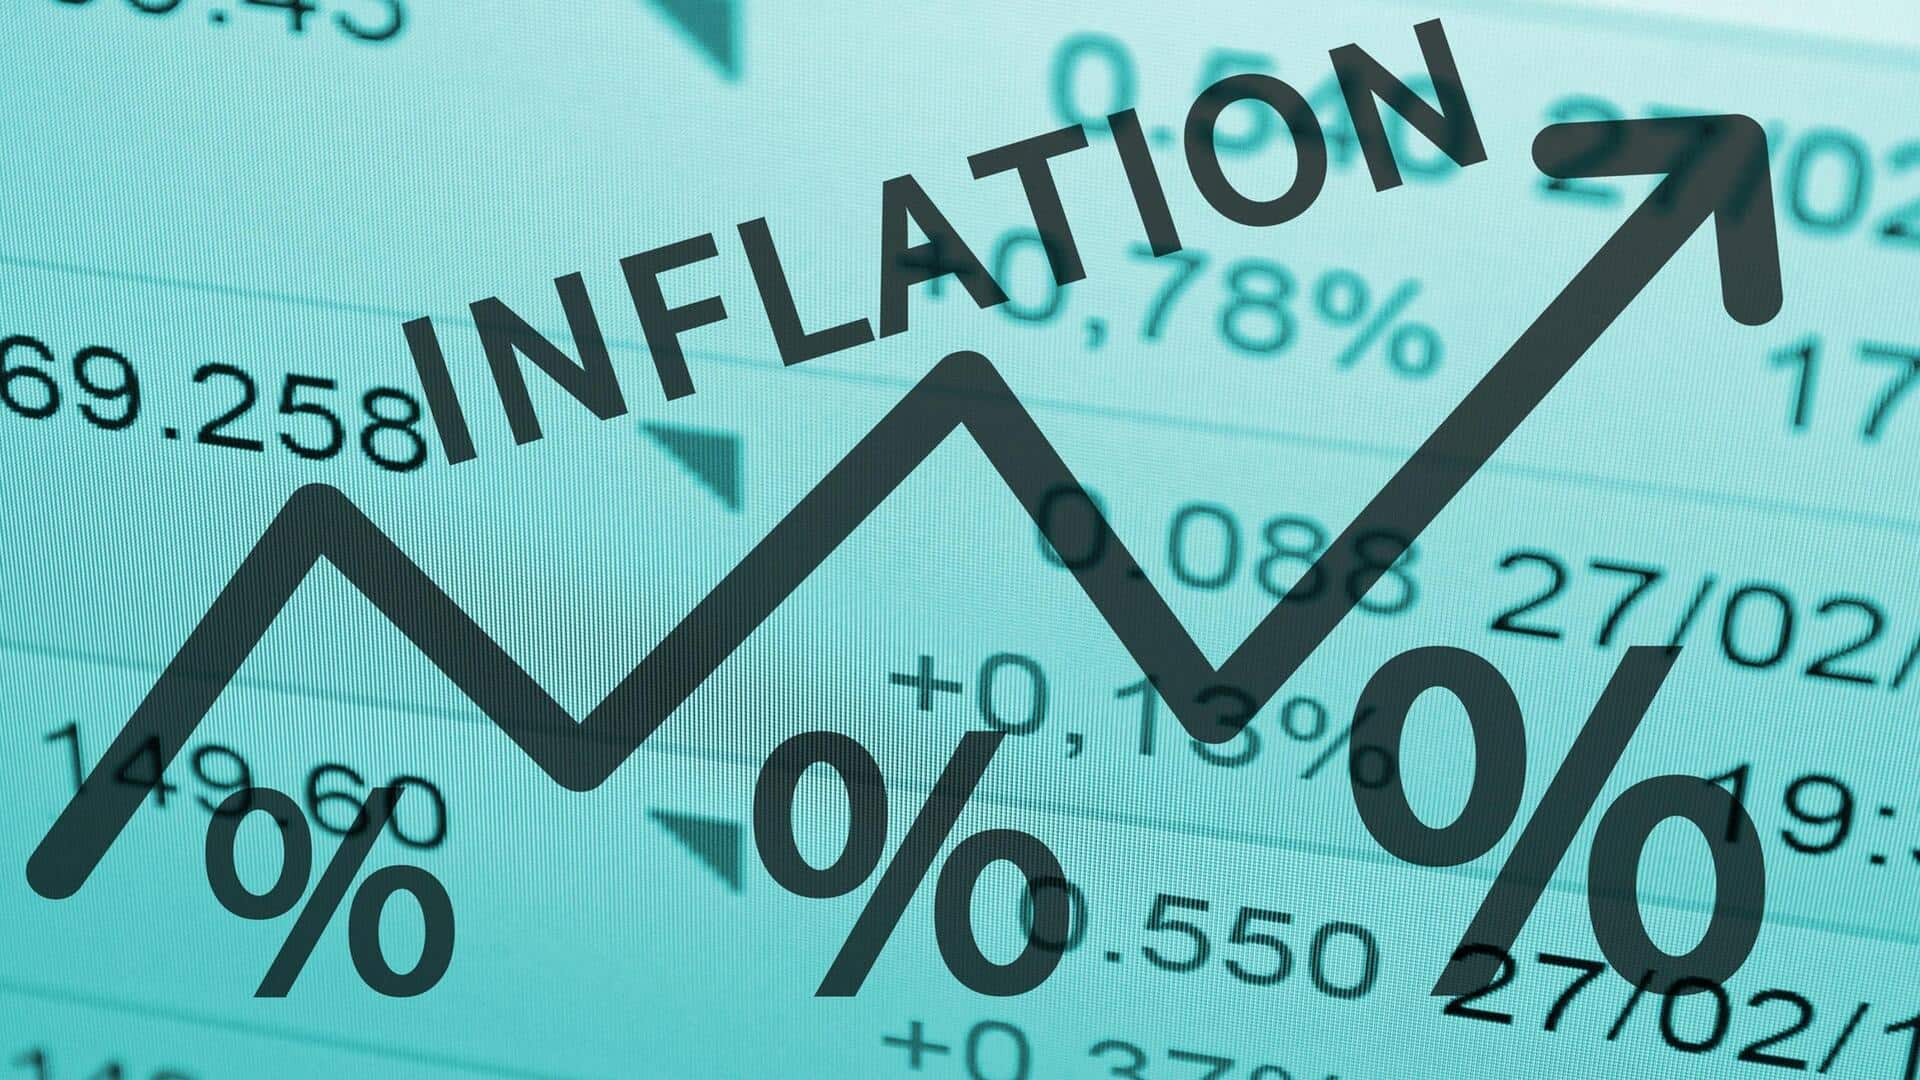 India's retail inflation reached 3-month high of 5.55% in November